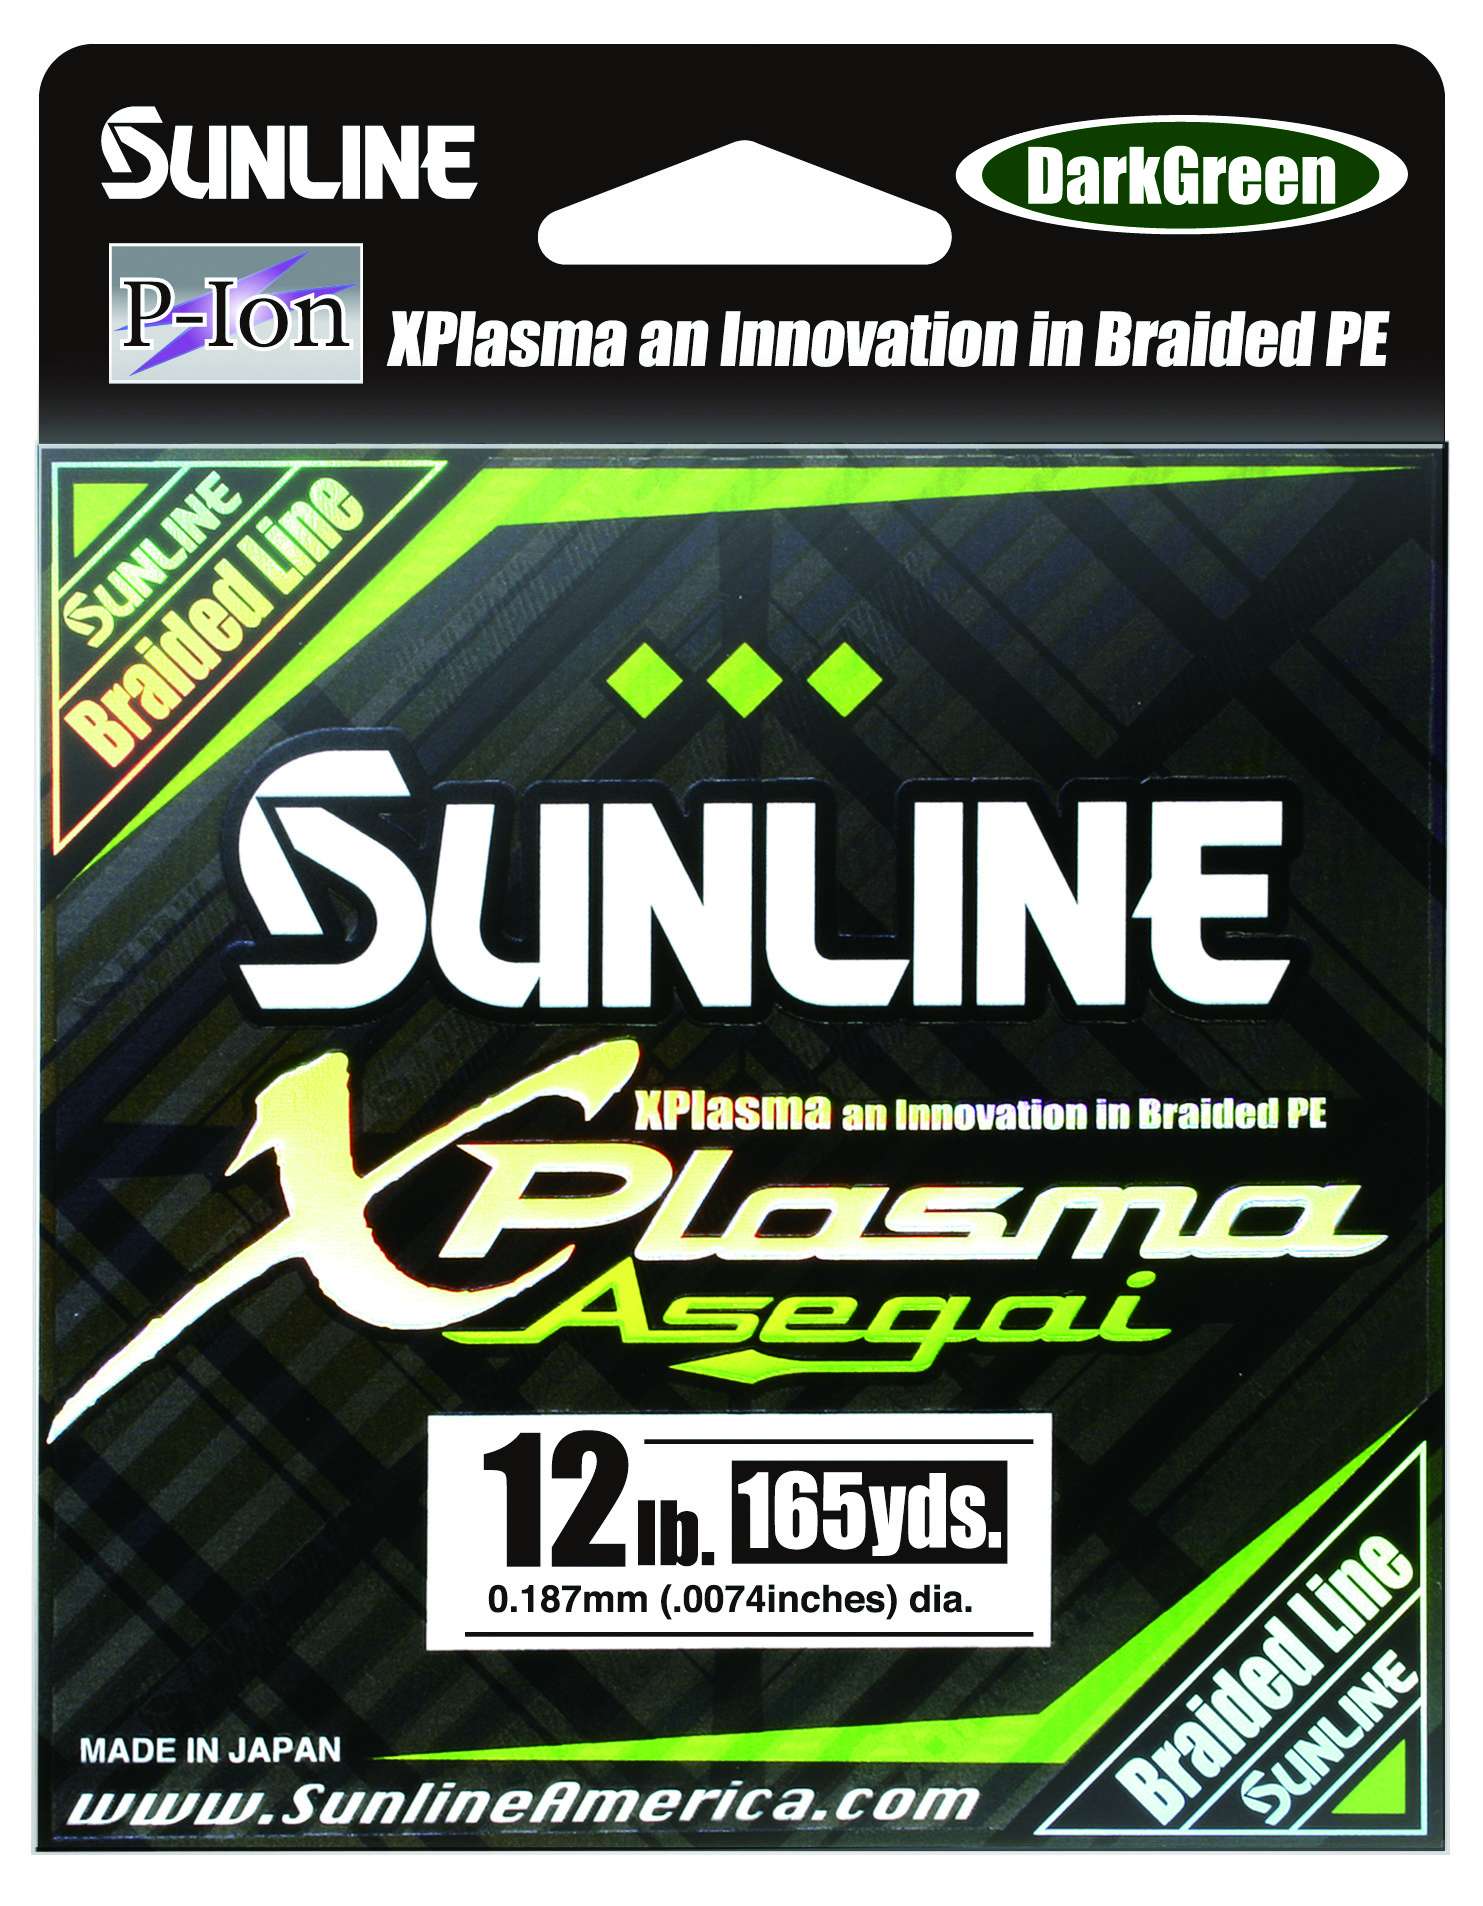 XPlasma<br>	
Sunline<br>
Sunline has once again set the mark in the braided line market with its newest introduction of XPlasma Asegai. Xplasma Asegai is an 8-strand braided line using Izanas braided line construction and is the first braided line to be made with Sunlineâs patented P-Ion process technology. This results in a braided line that has a slicker surface, creating less friction when passing through the rods line guides increasing casting distance, and cutting down on line noise. It is manufactured with strong water repelling characteristics and has improved abrasion resistance increasing the lines performance. 
